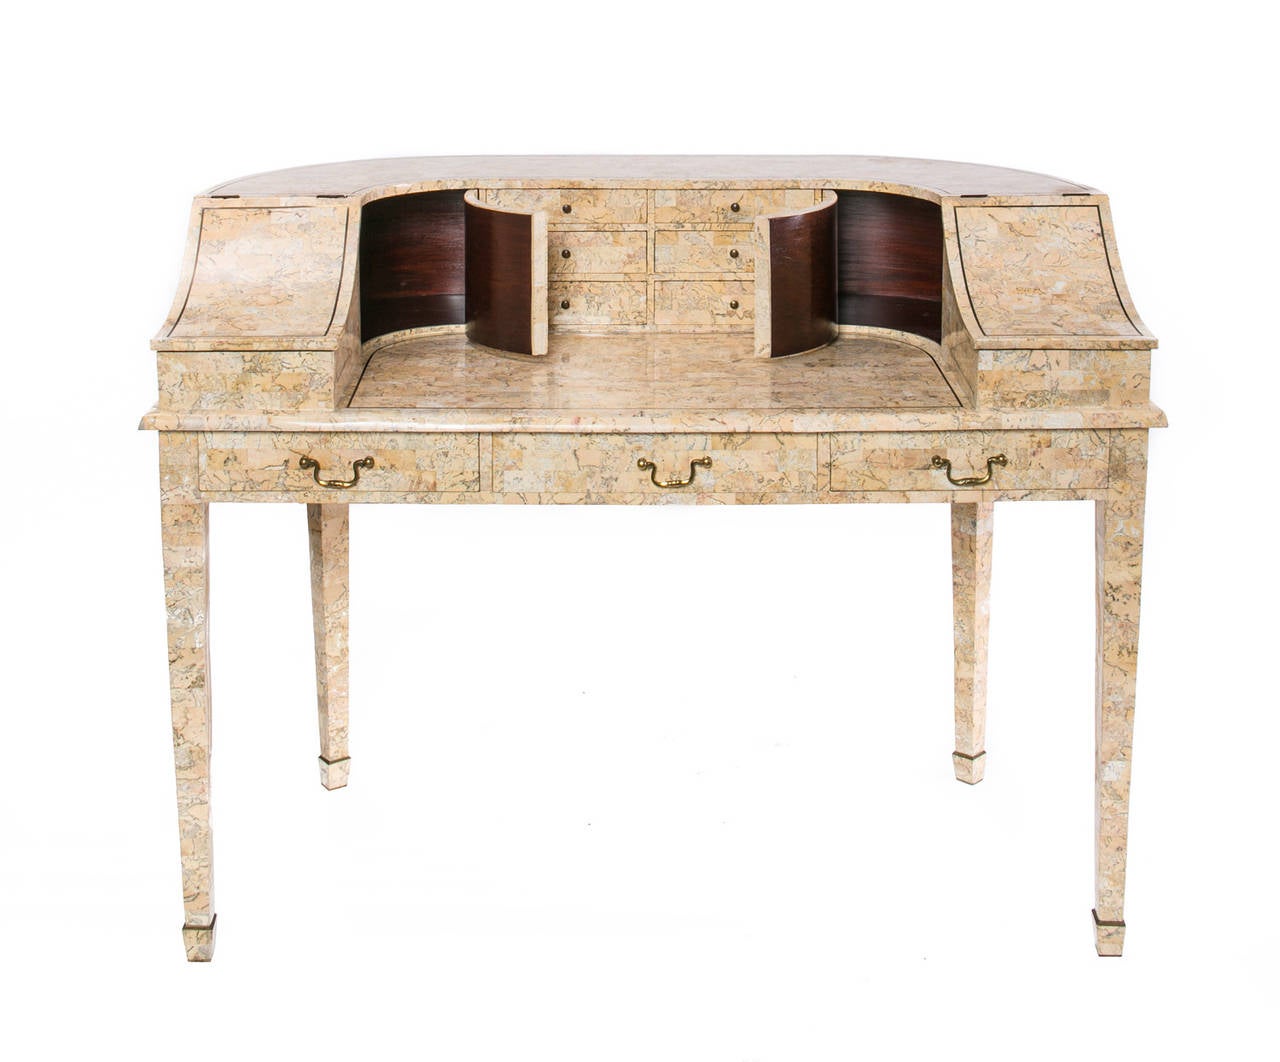 Peach marble tiled mahogany desk with curved back and multiple compartments.